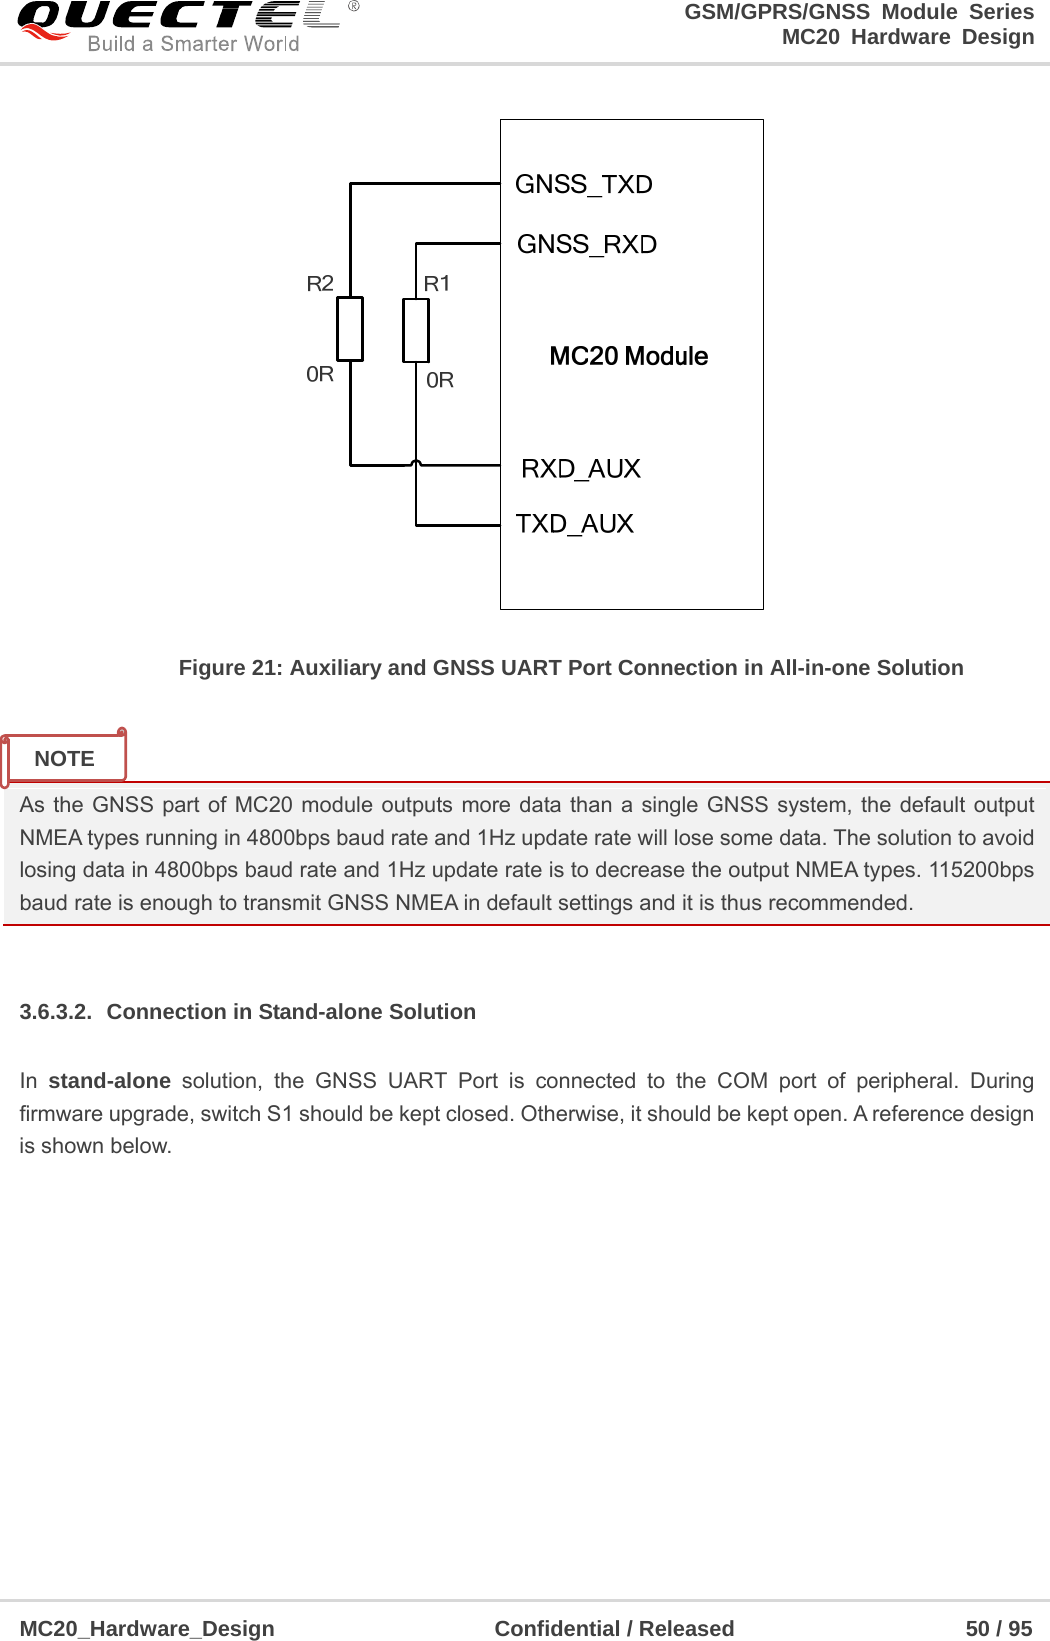                                                                     GSM/GPRS/GNSS Module Series                                                                 MC20 Hardware Design  MC20_Hardware_Design                    Confidential / Released                     50 / 95      Figure 21: Auxiliary and GNSS UART Port Connection in All-in-one Solution   As the GNSS part of MC20 module outputs more data than a single GNSS system, the default output NMEA types running in 4800bps baud rate and 1Hz update rate will lose some data. The solution to avoid losing data in 4800bps baud rate and 1Hz update rate is to decrease the output NMEA types. 115200bps baud rate is enough to transmit GNSS NMEA in default settings and it is thus recommended.  3.6.3.2.  Connection in Stand-alone Solution In  stand-alone solution, the GNSS UART Port is connected to the COM port of peripheral. During firmware upgrade, switch S1 should be kept closed. Otherwise, it should be kept open. A reference design is shown below. NOTE 